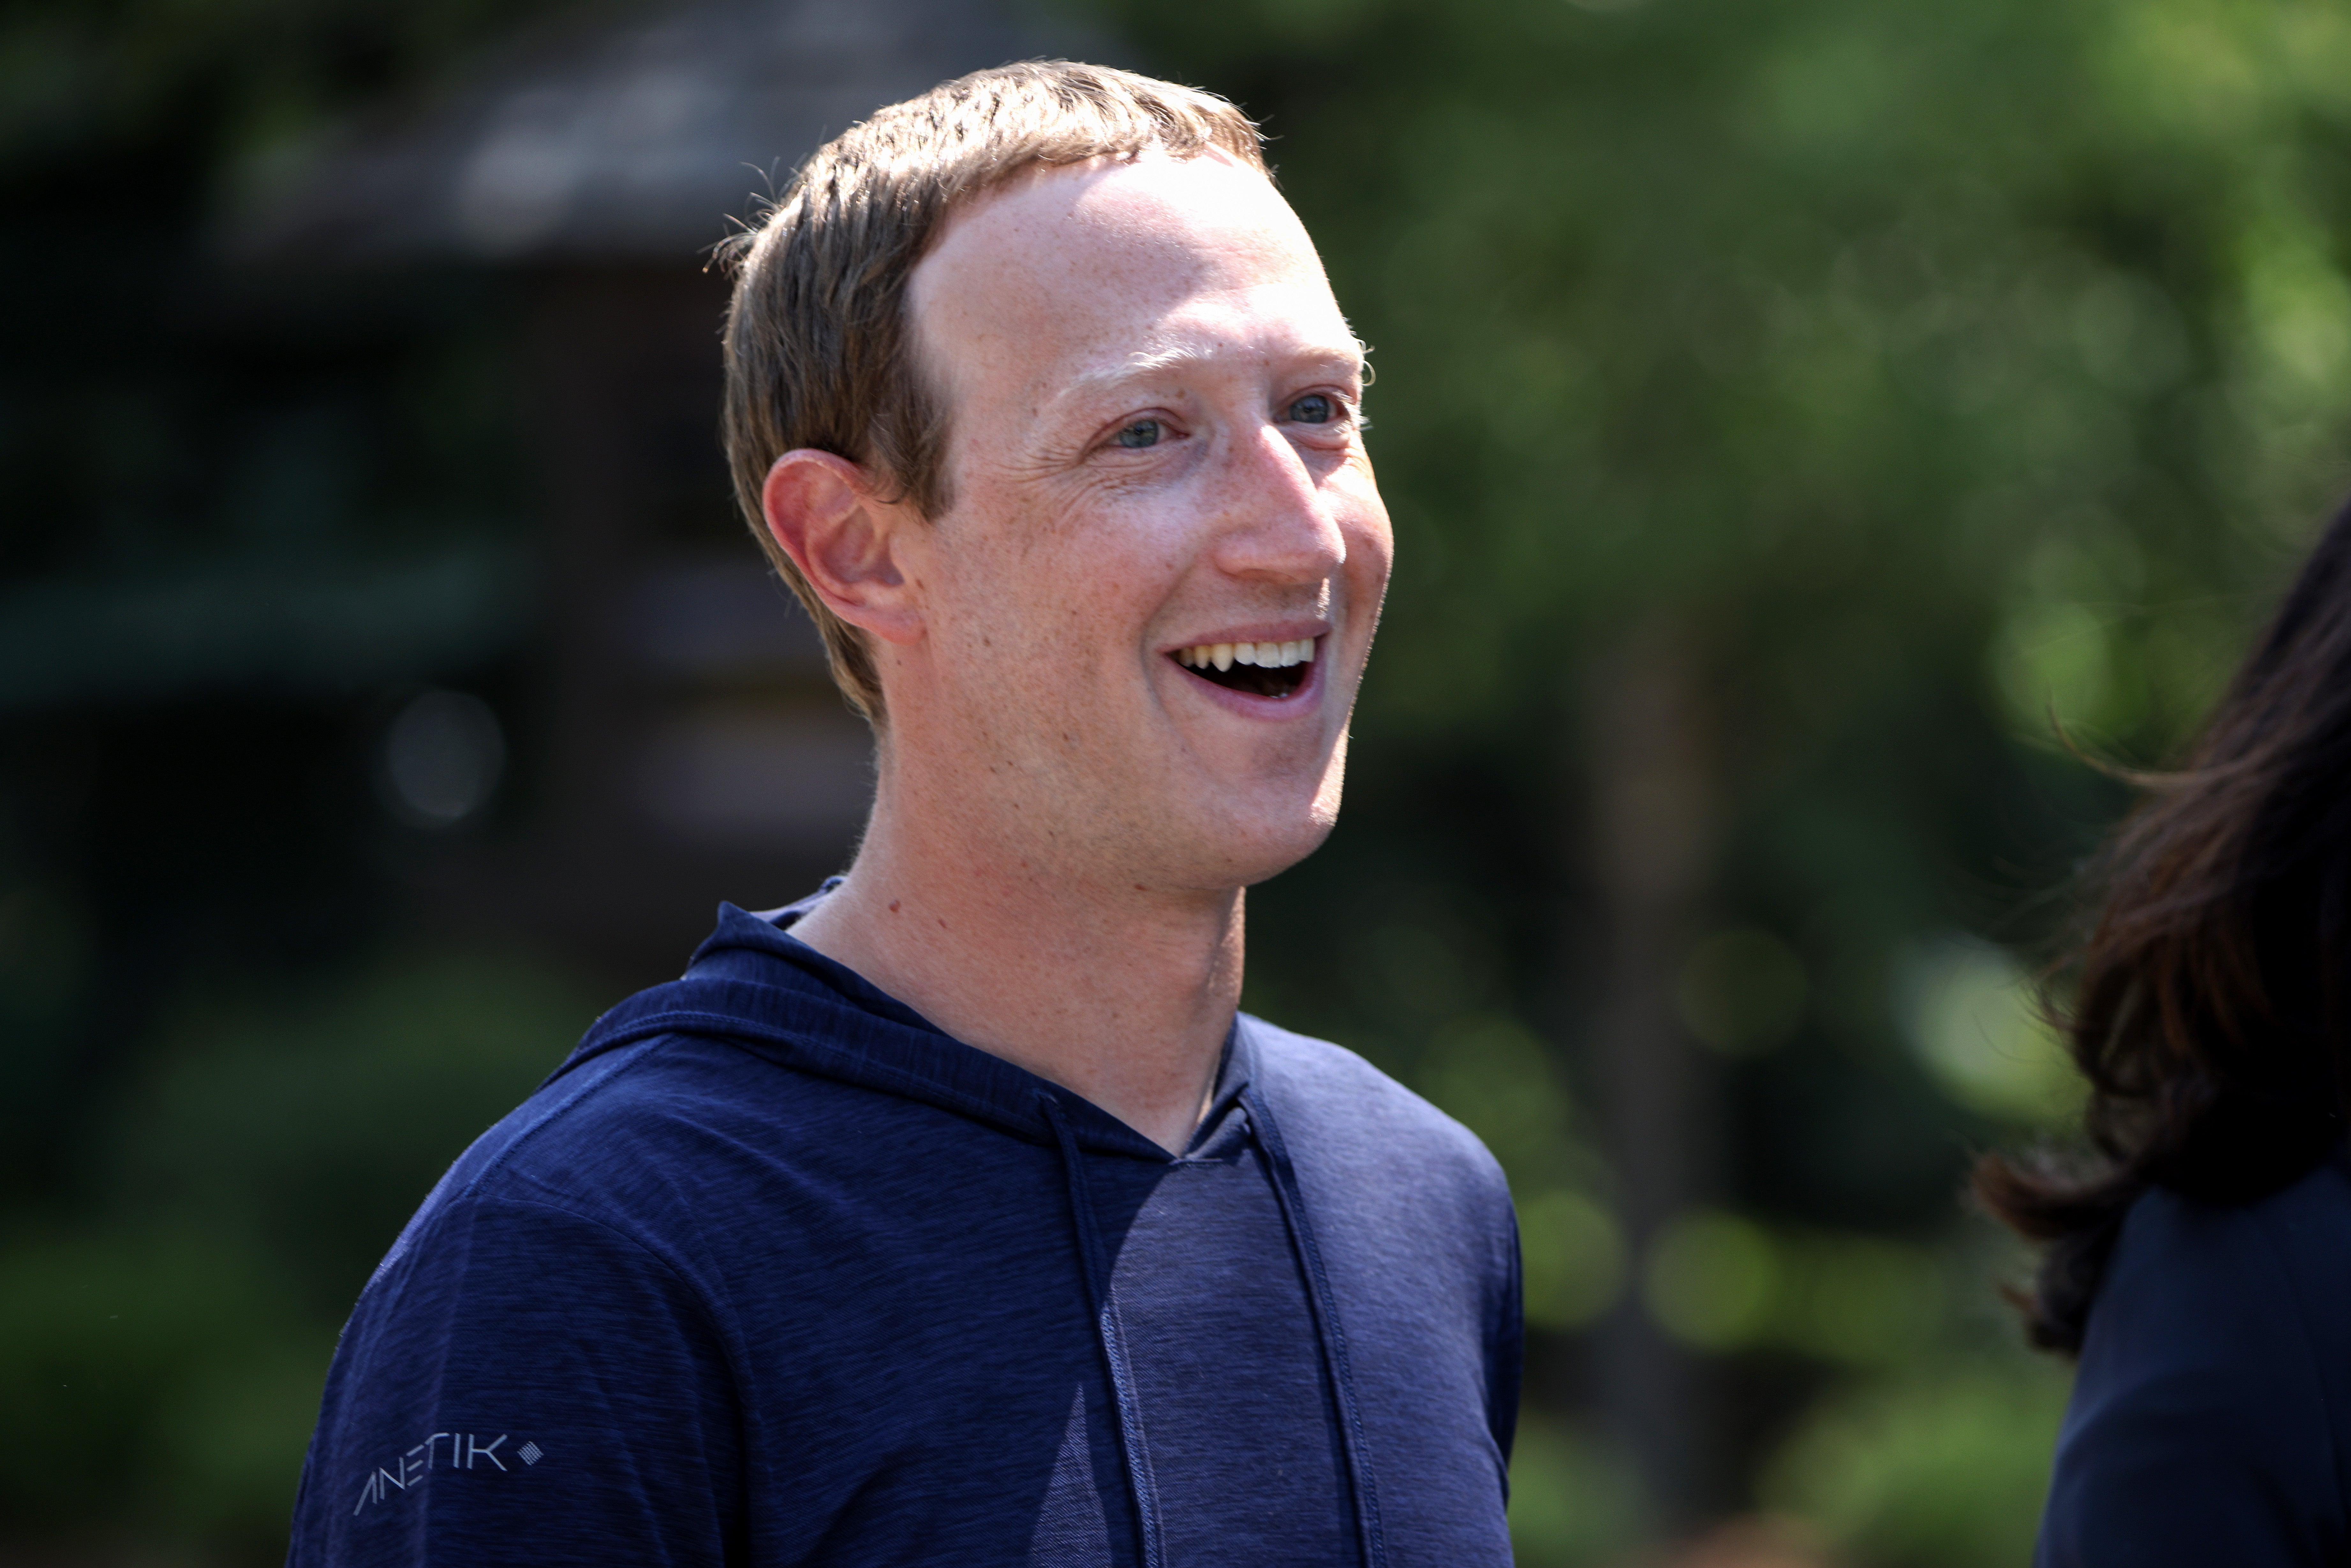 Facebook founder Mark Zuckerberg was accused of allowing the platform be used for ‘greenwashing’ campaigns